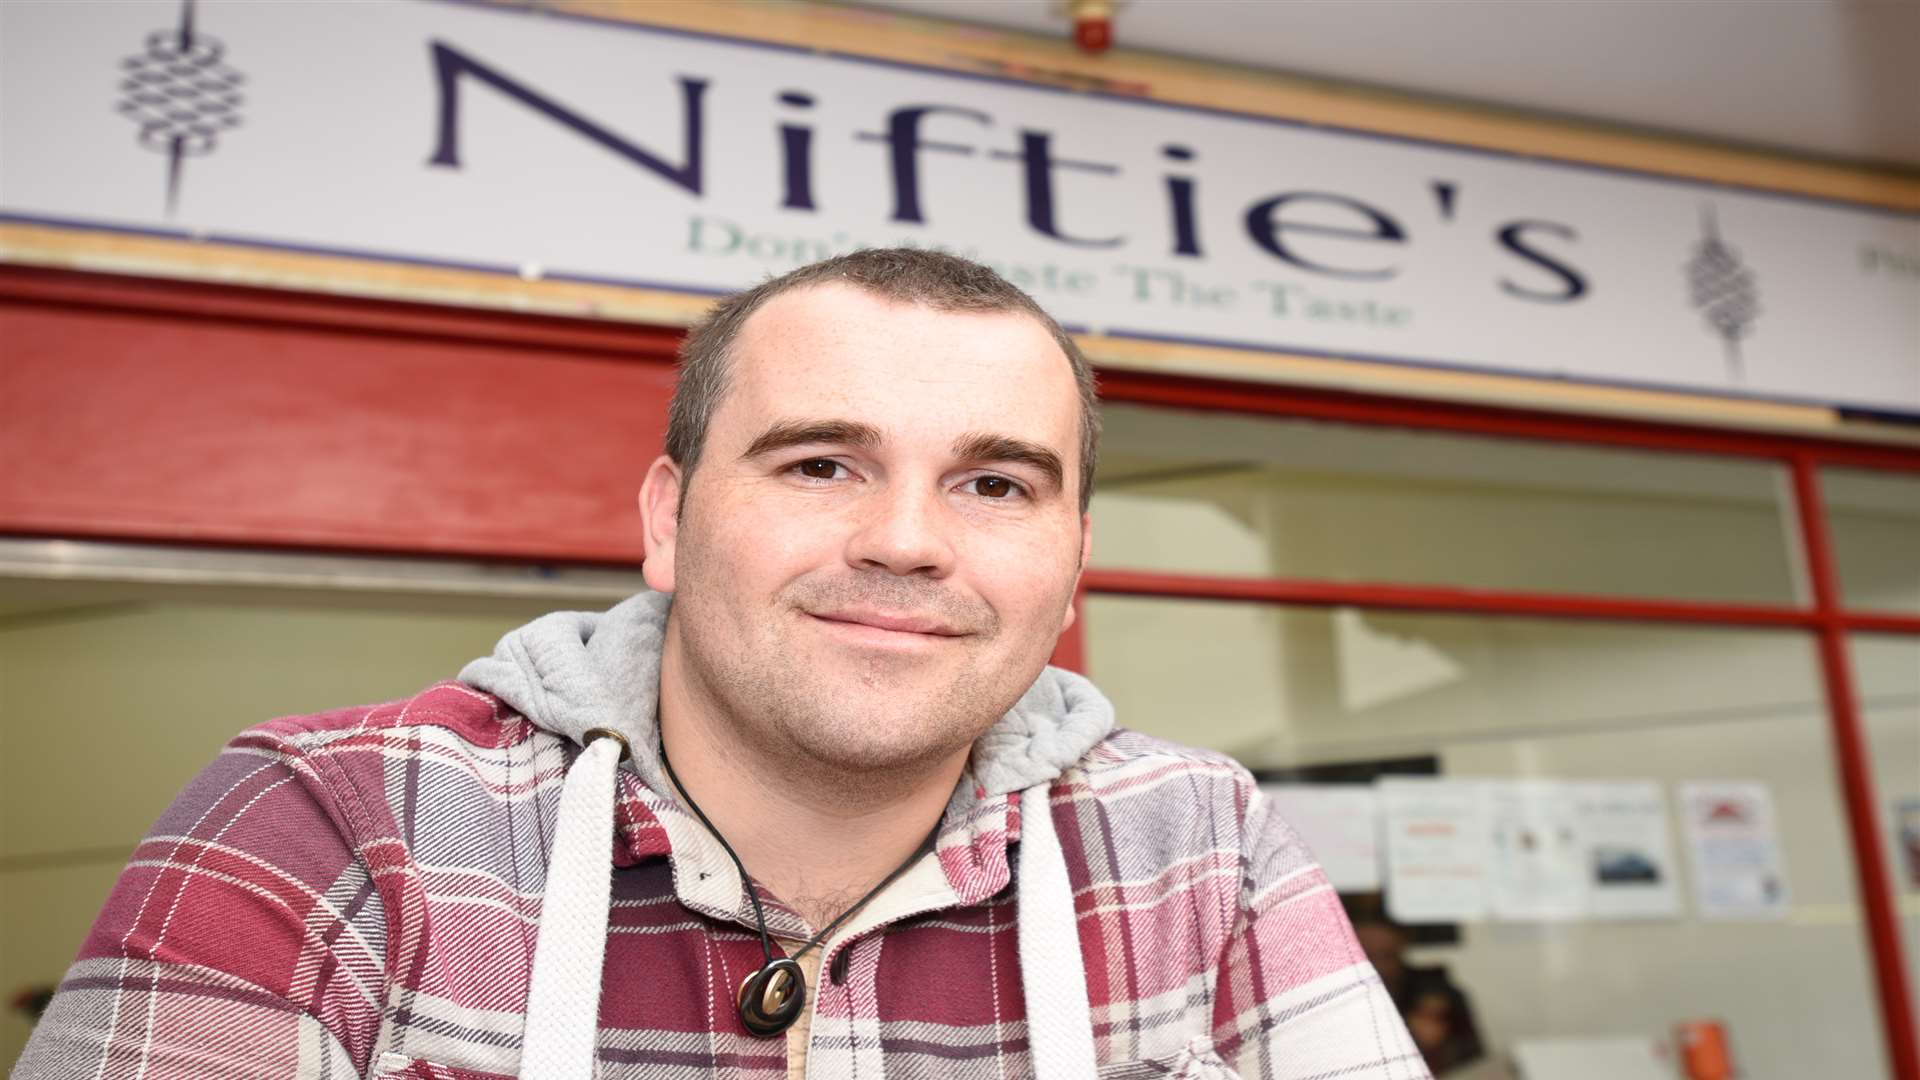 Nathaniel Richards outside Niftie's in the Charlton Shopping Centre, Dover